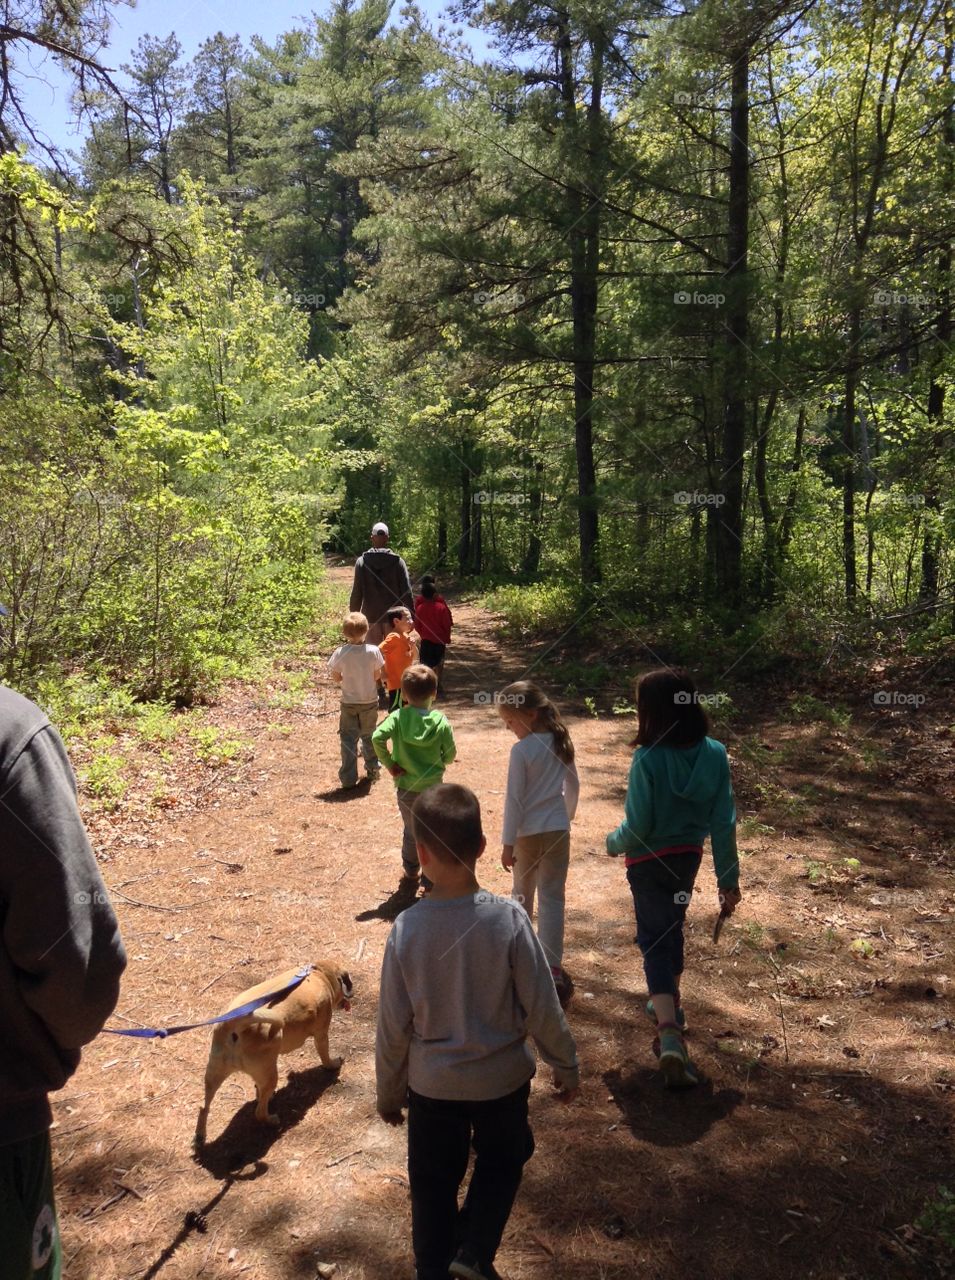 Hiking through the woods. Teaching the kids about nature on a hike through the woods